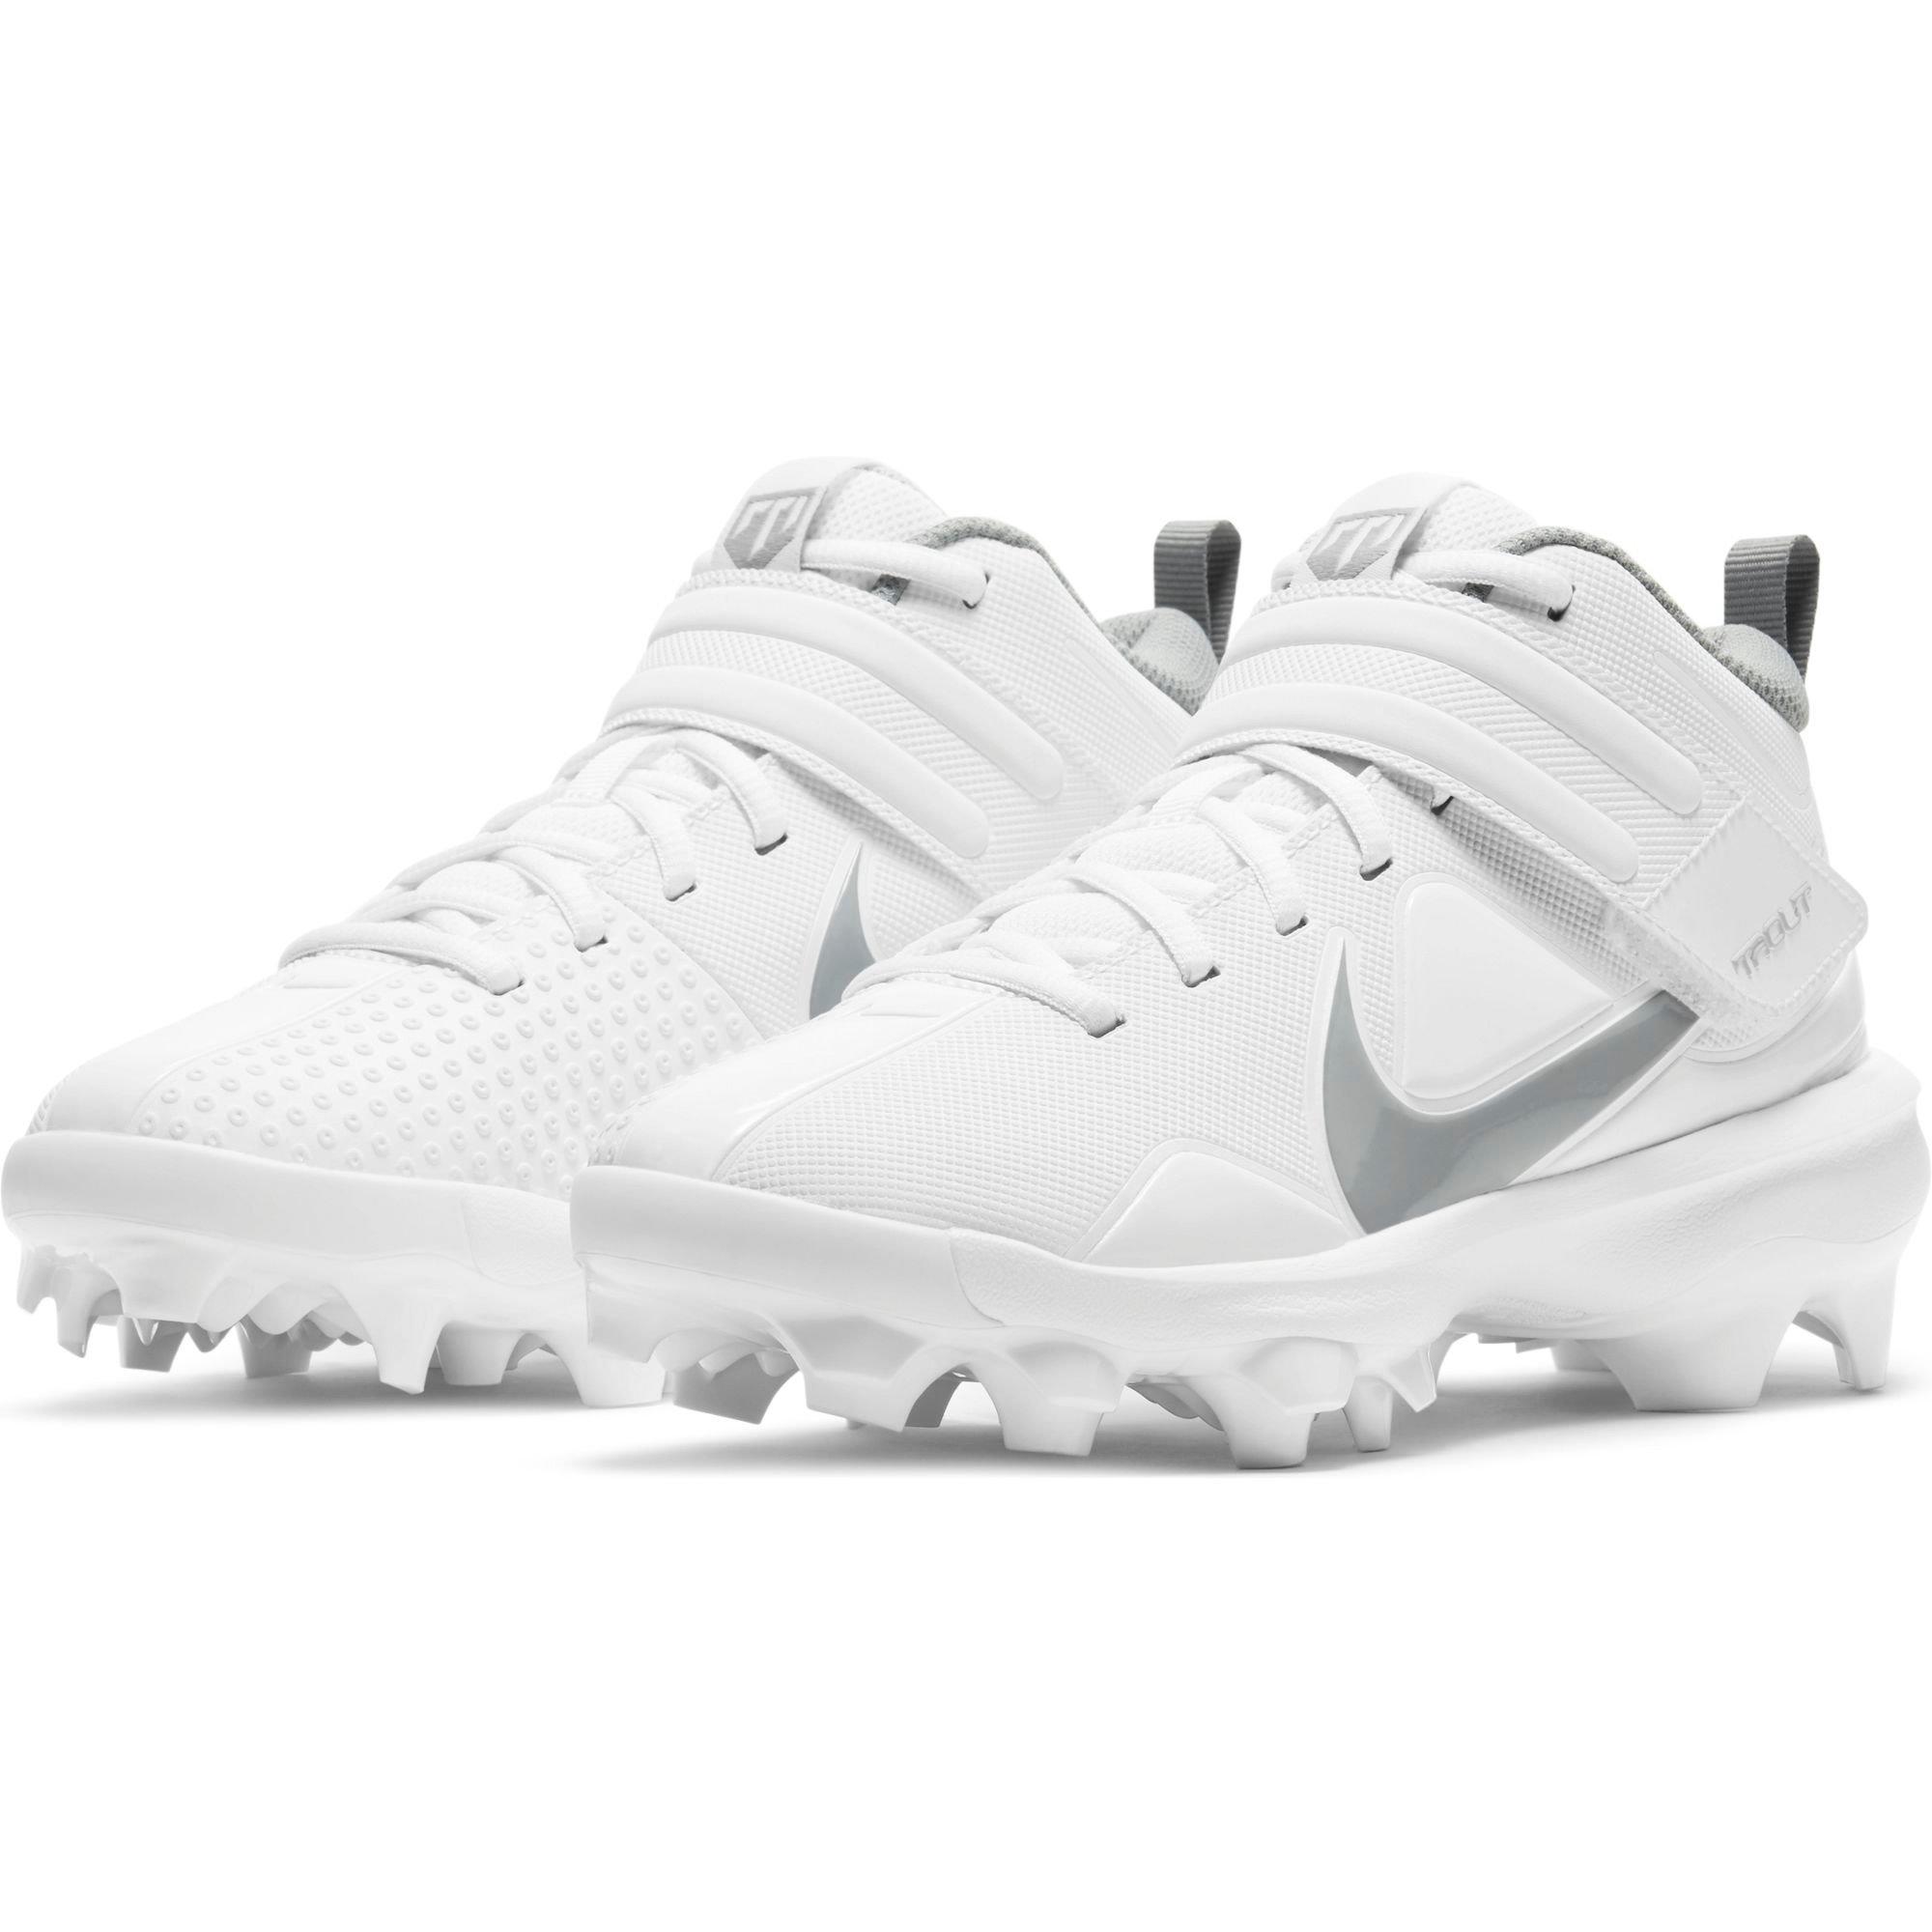 Nike Force Trout 7 Pro Mcs Big Kids' Baseball Cleats In Game Royal